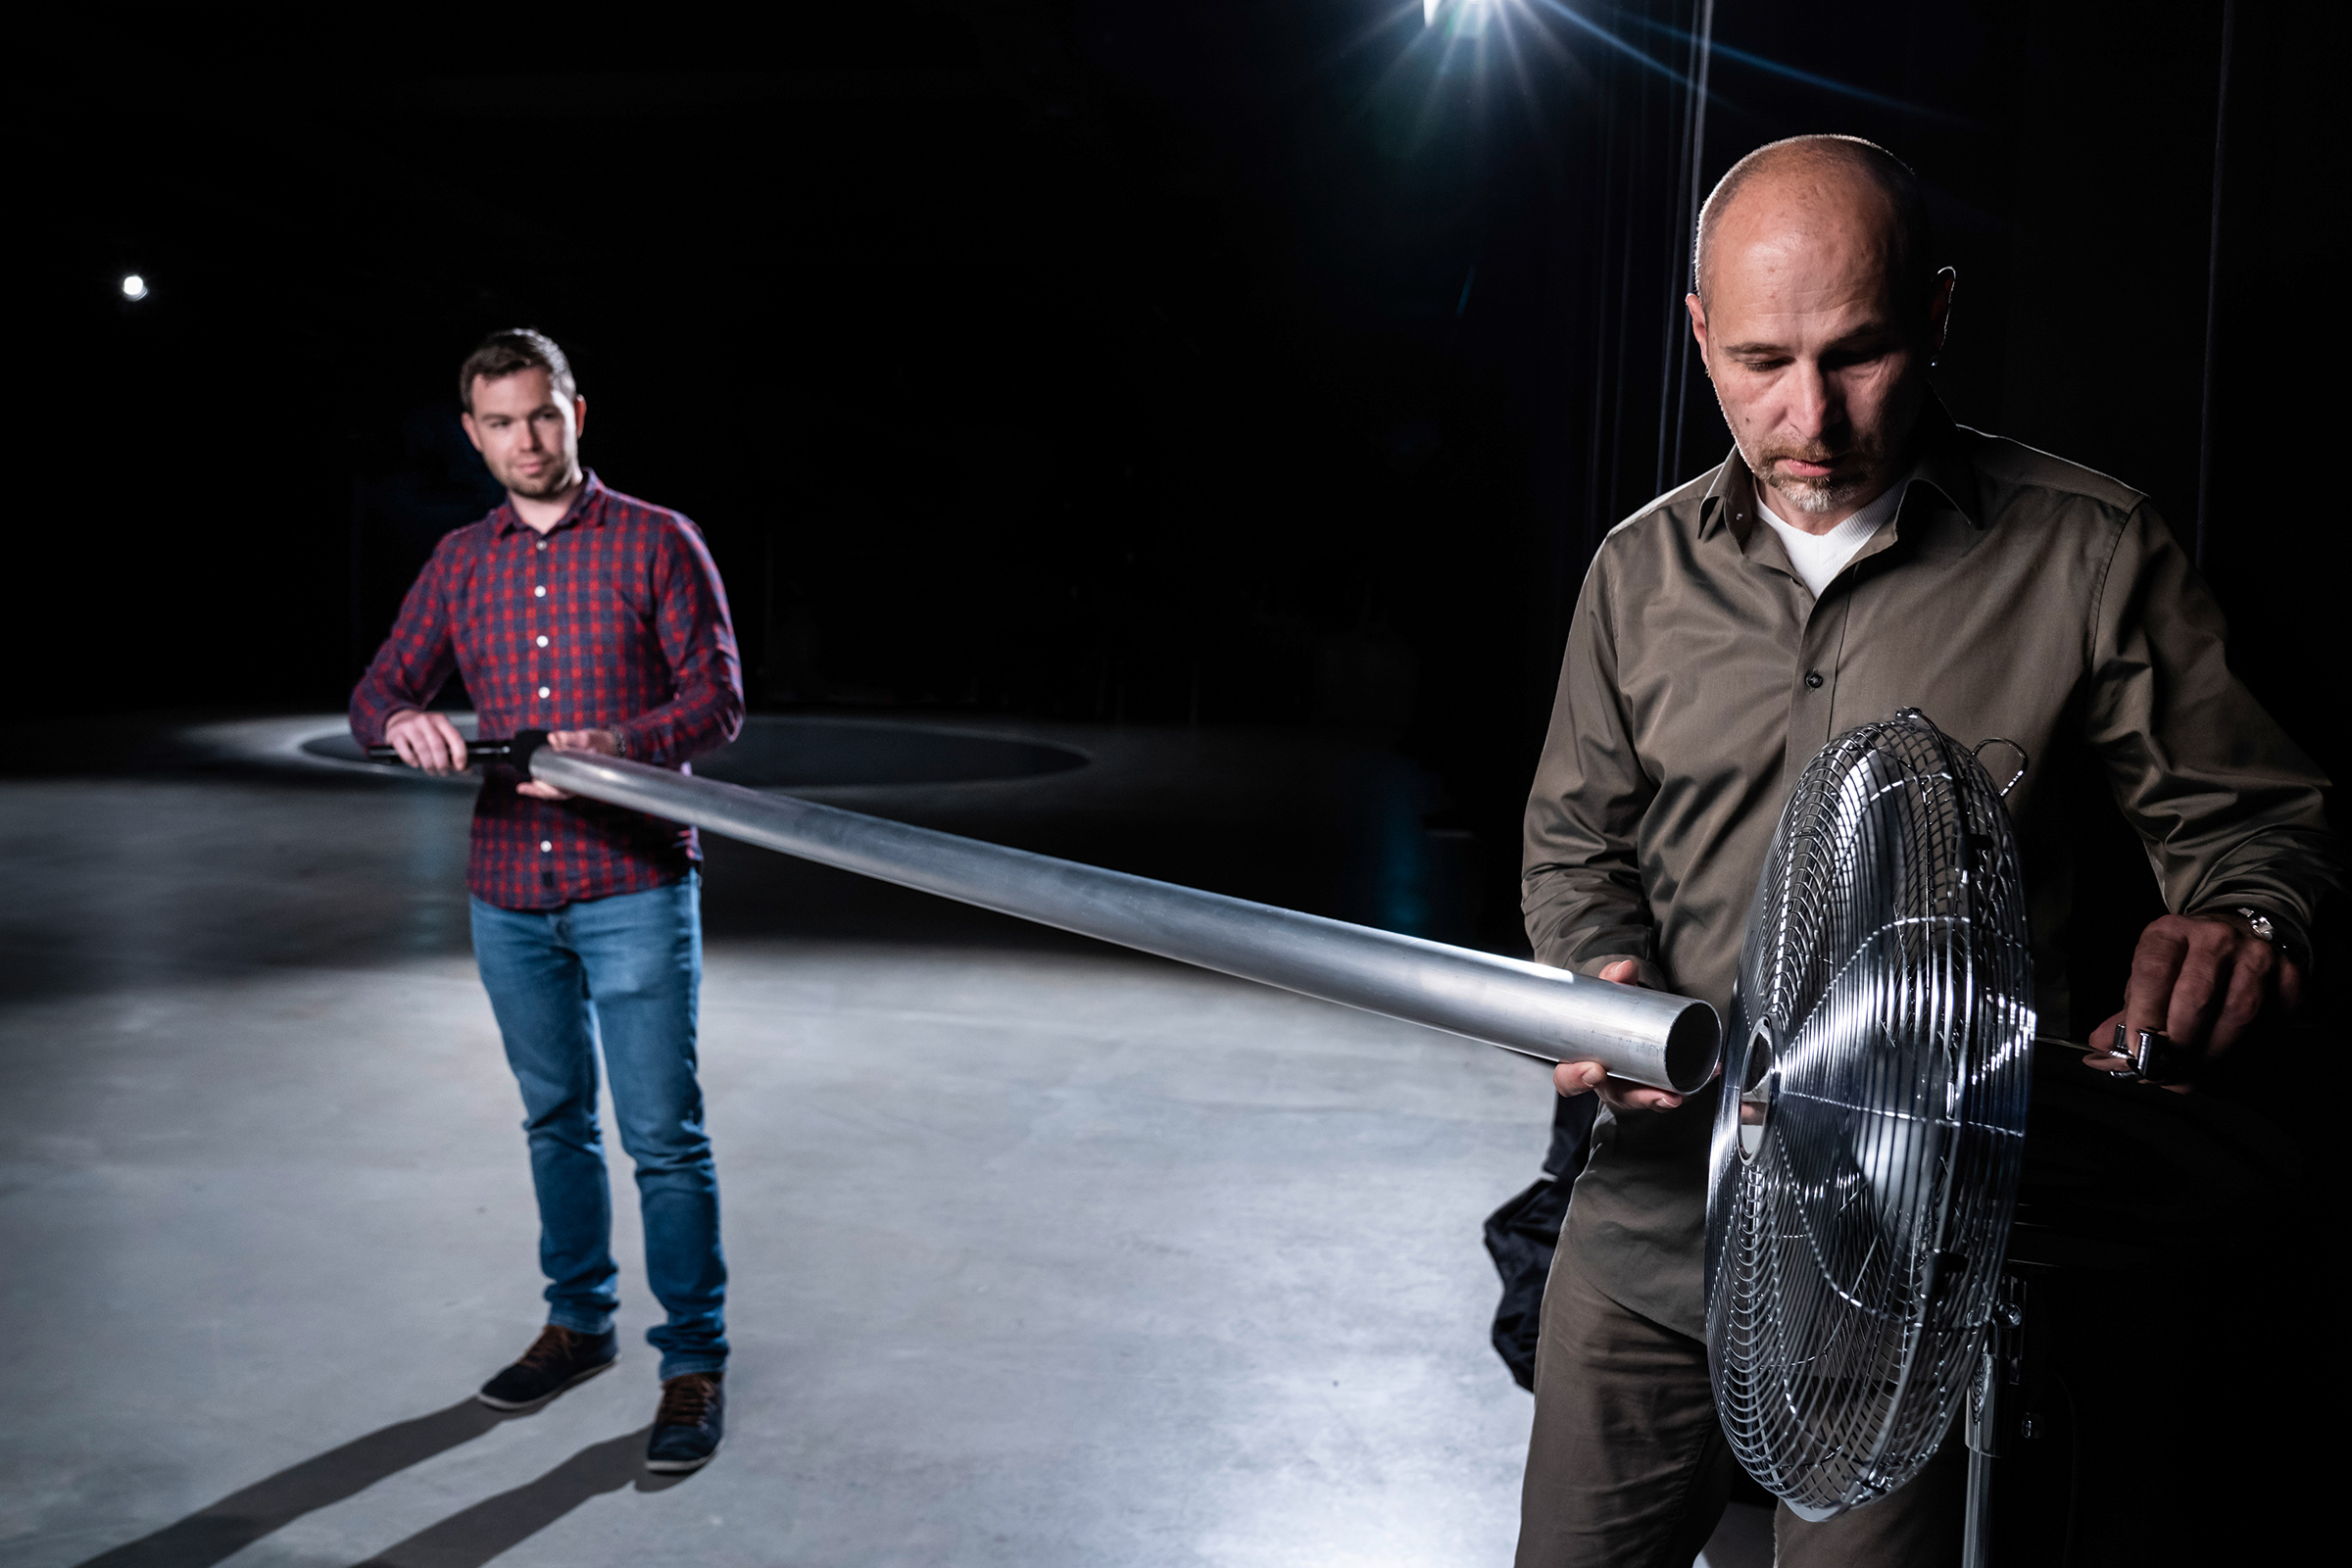 Audi sound engineers Stephan Gsell and Rudolf Halbmeir experiment with sound-production techniques (Courtesy Audi)